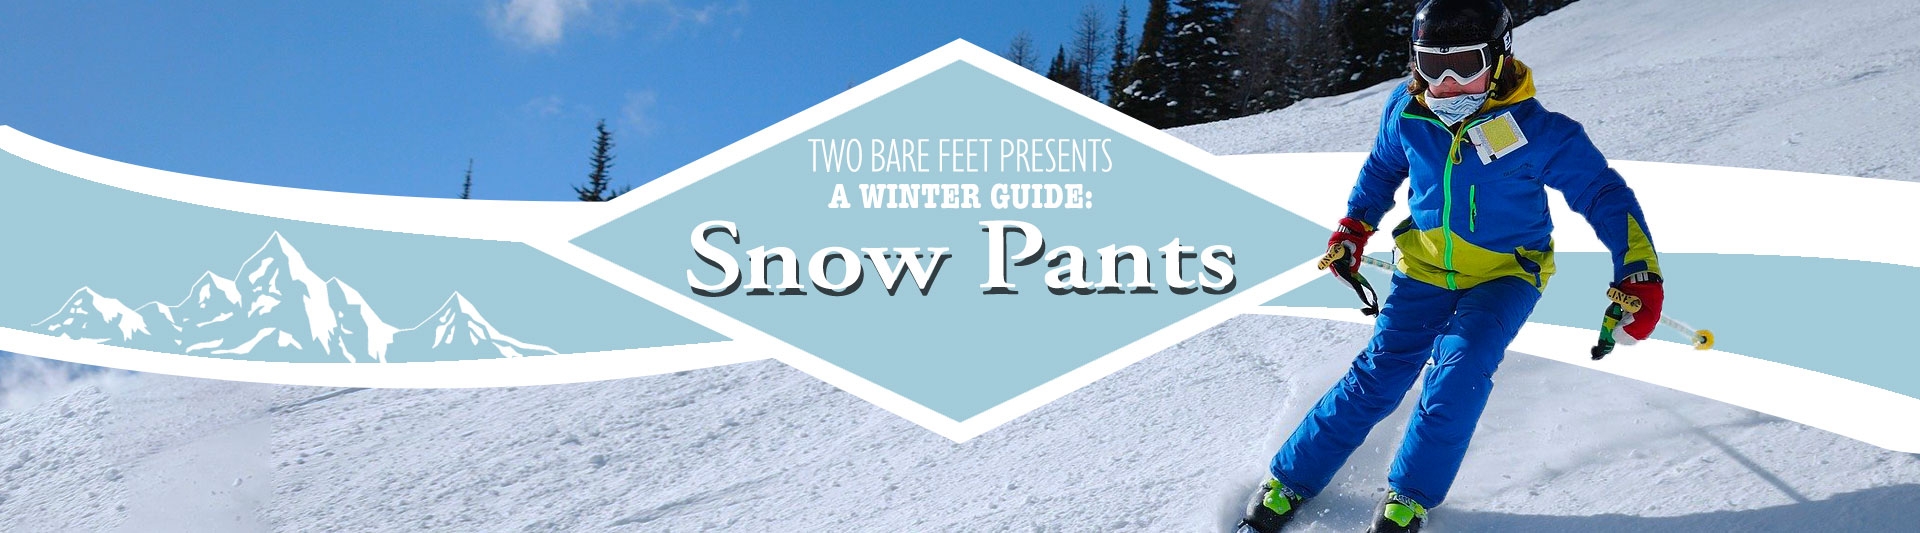 Women's snow trousers banner